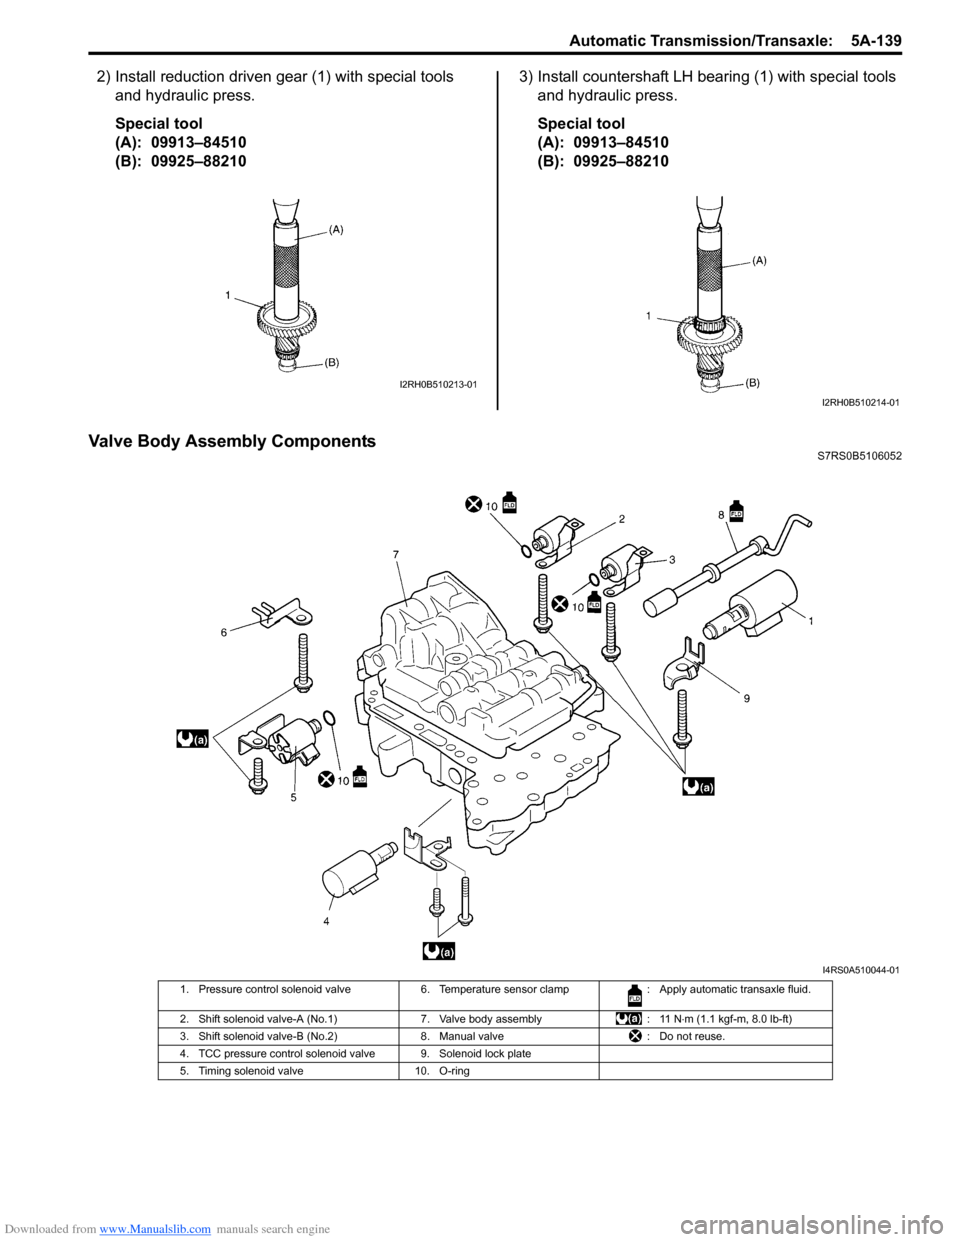 SUZUKI SWIFT 2008 2.G Service Workshop Manual Downloaded from www.Manualslib.com manuals search engine Automatic Transmission/Transaxle:  5A-139
2) Install reduction driven gear (1) with special tools and hydraulic press.
Special tool
(A):  09913